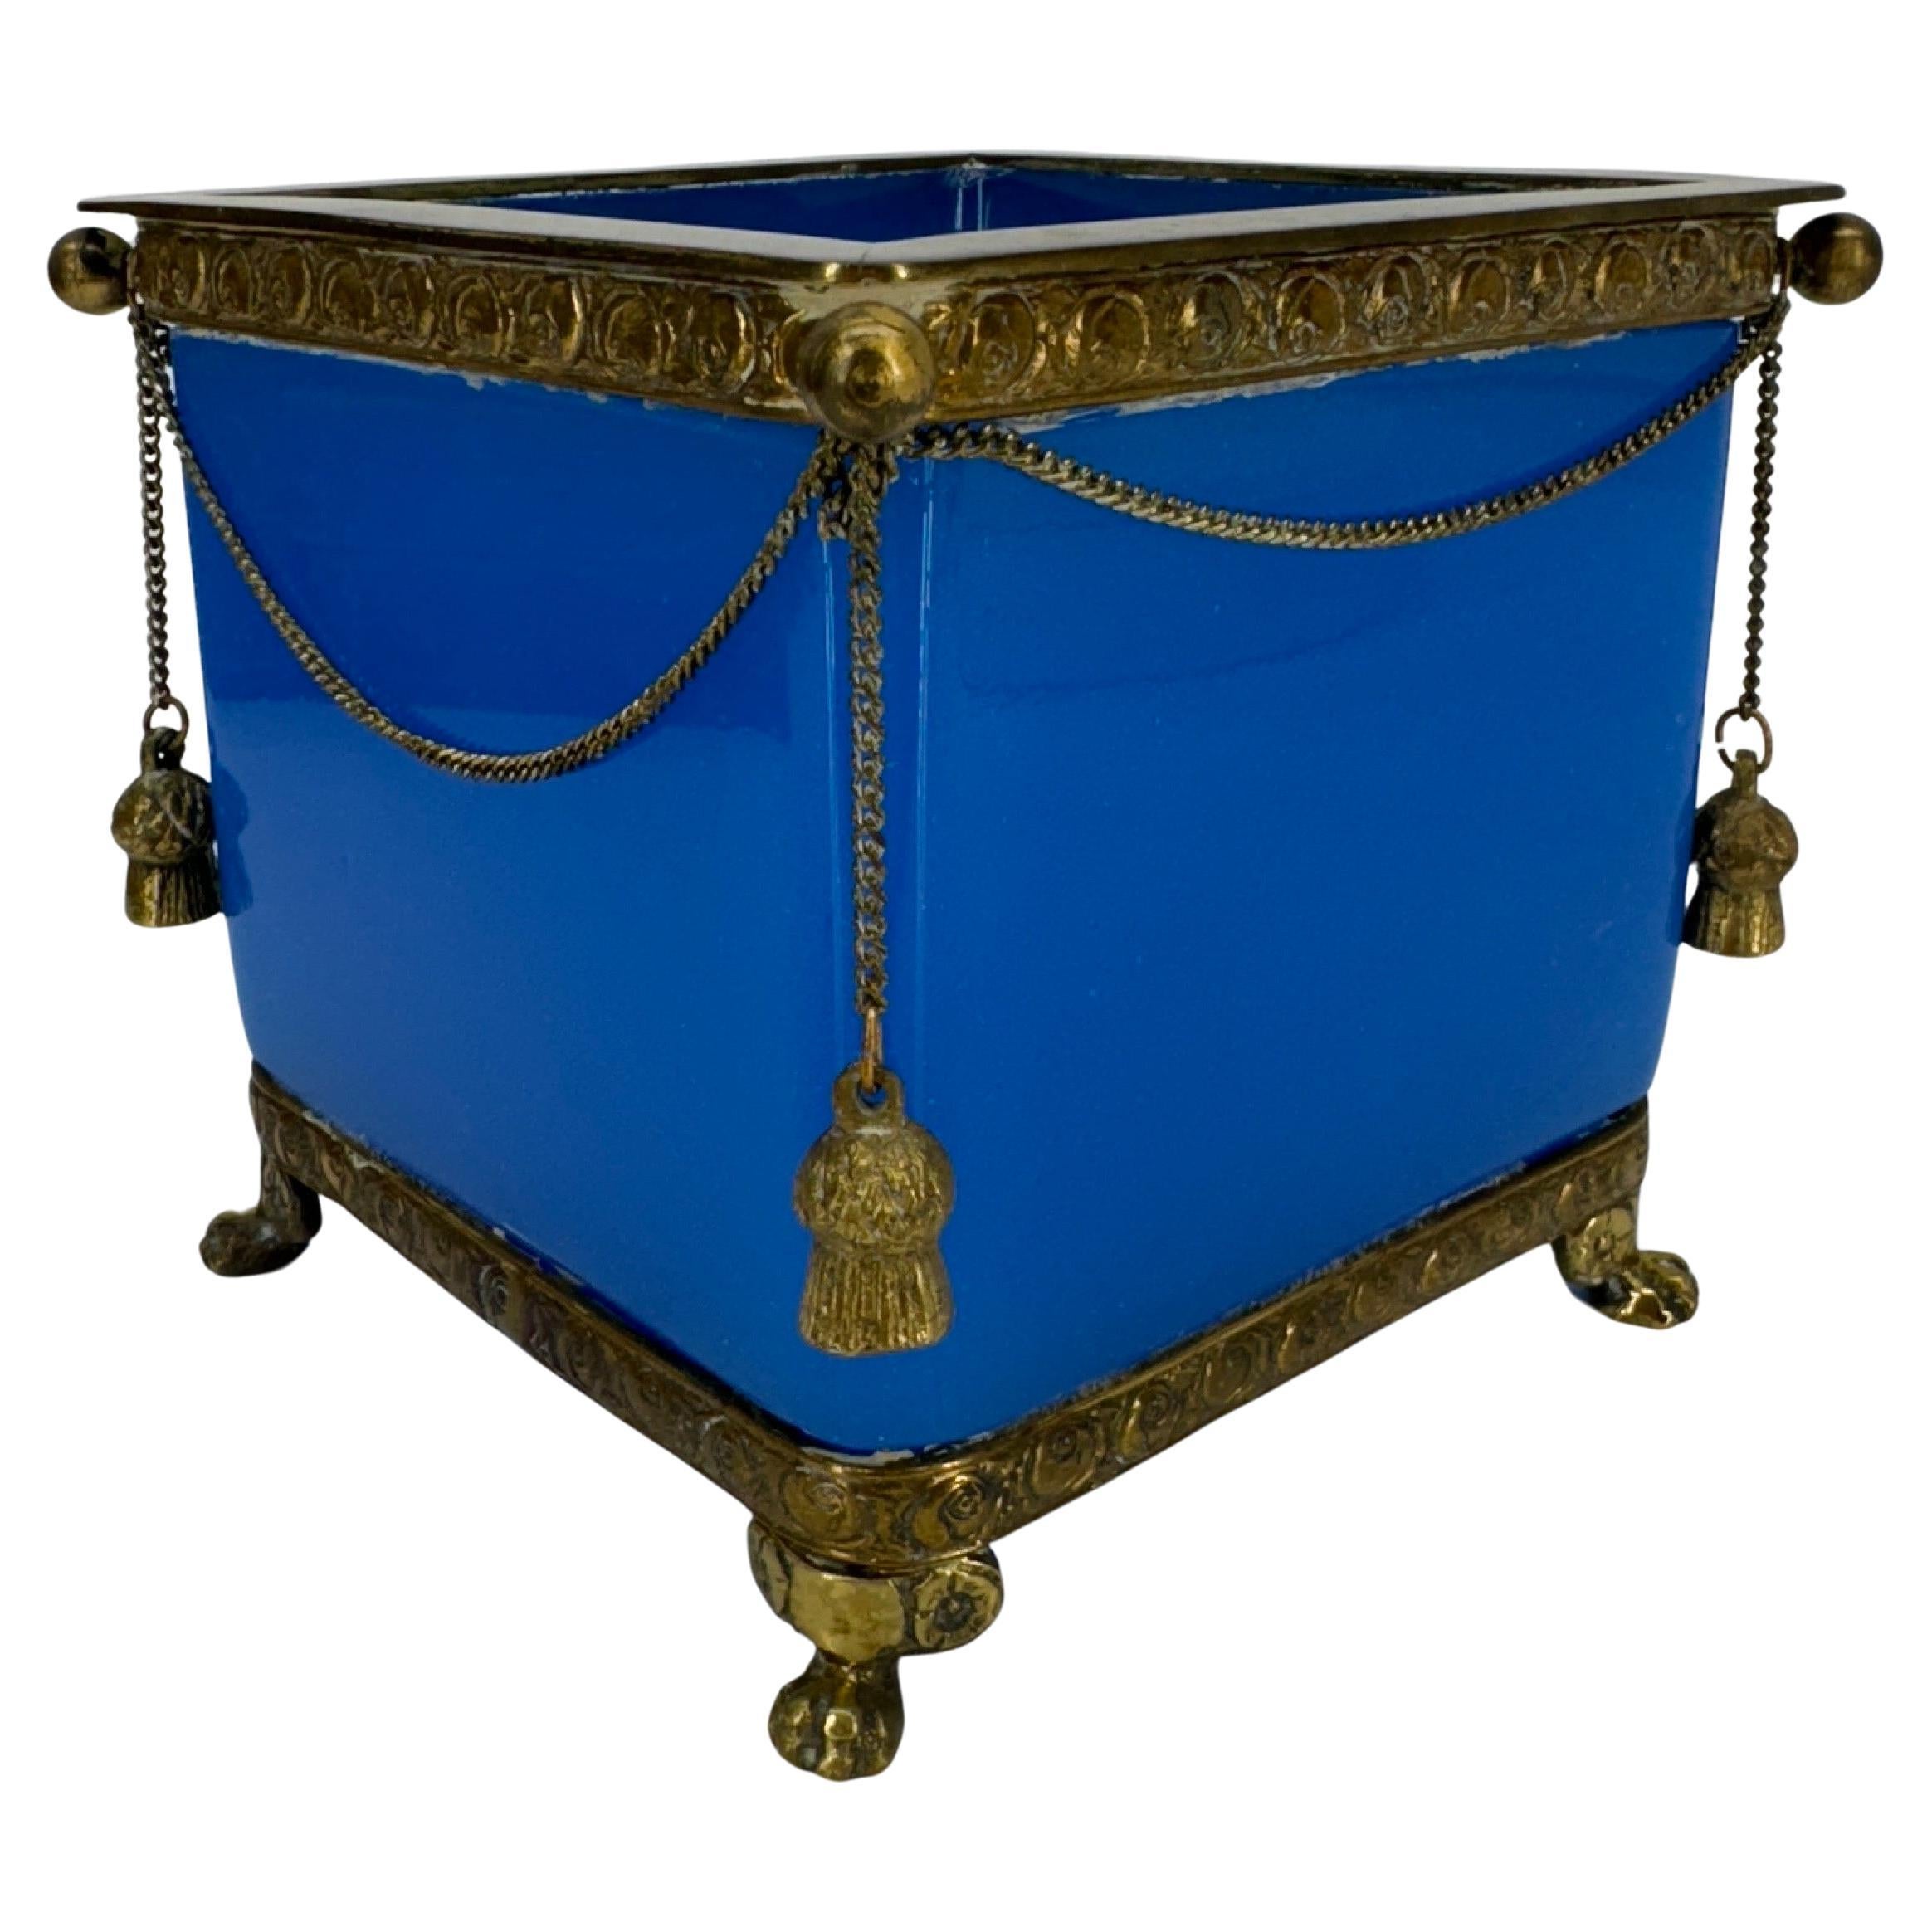 Cube shaped blue opaline glass planter jardiniere with gilt brass hardware.
The gilt brass is presented in its authentic patina but can be polished upon buyers request. All 4 corners have the brass balls.